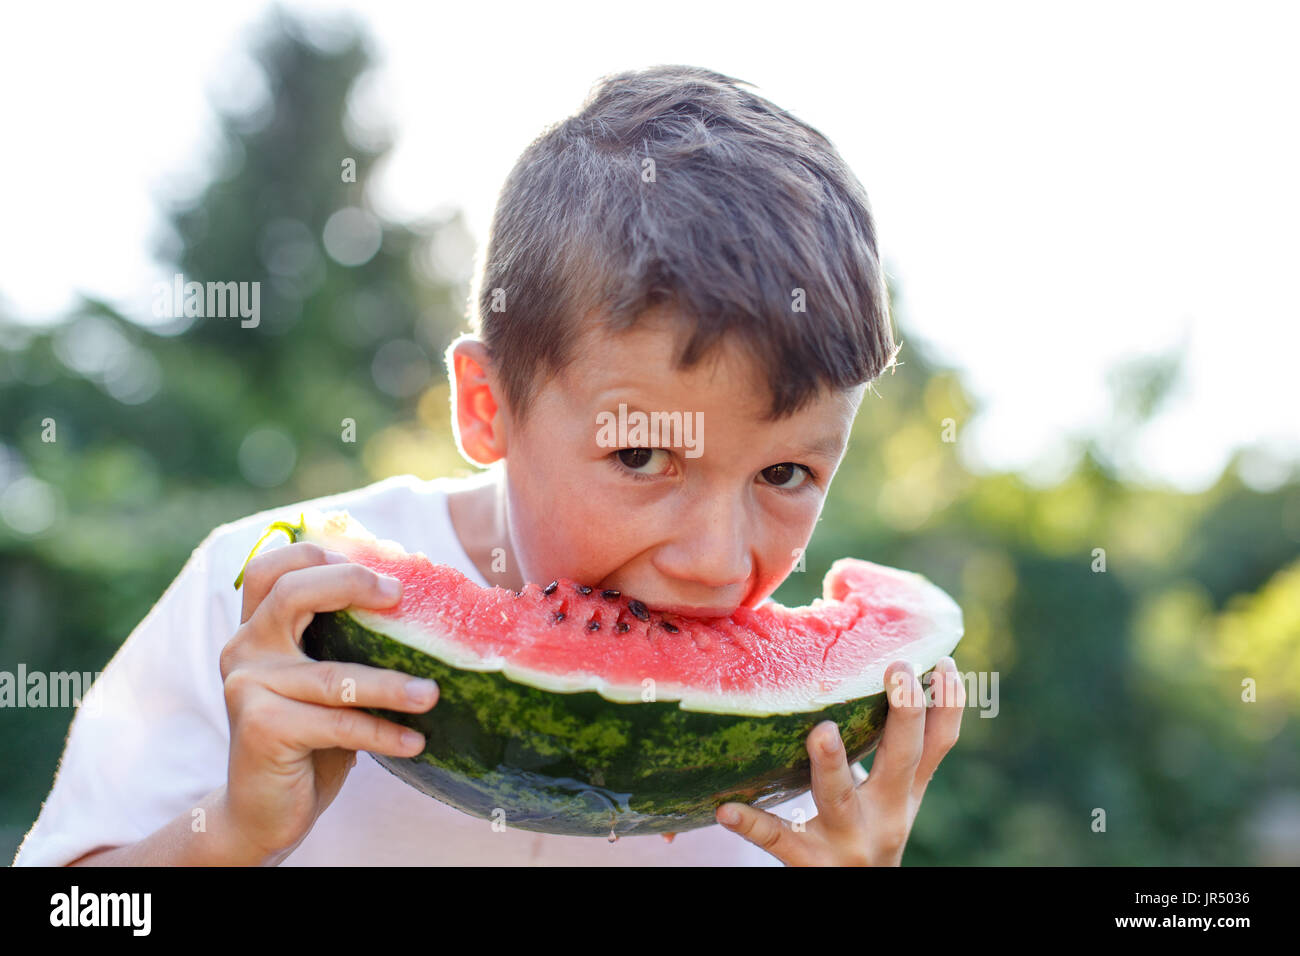 Little boy bite into watermelon and looking into camera outdoor Stock Photo